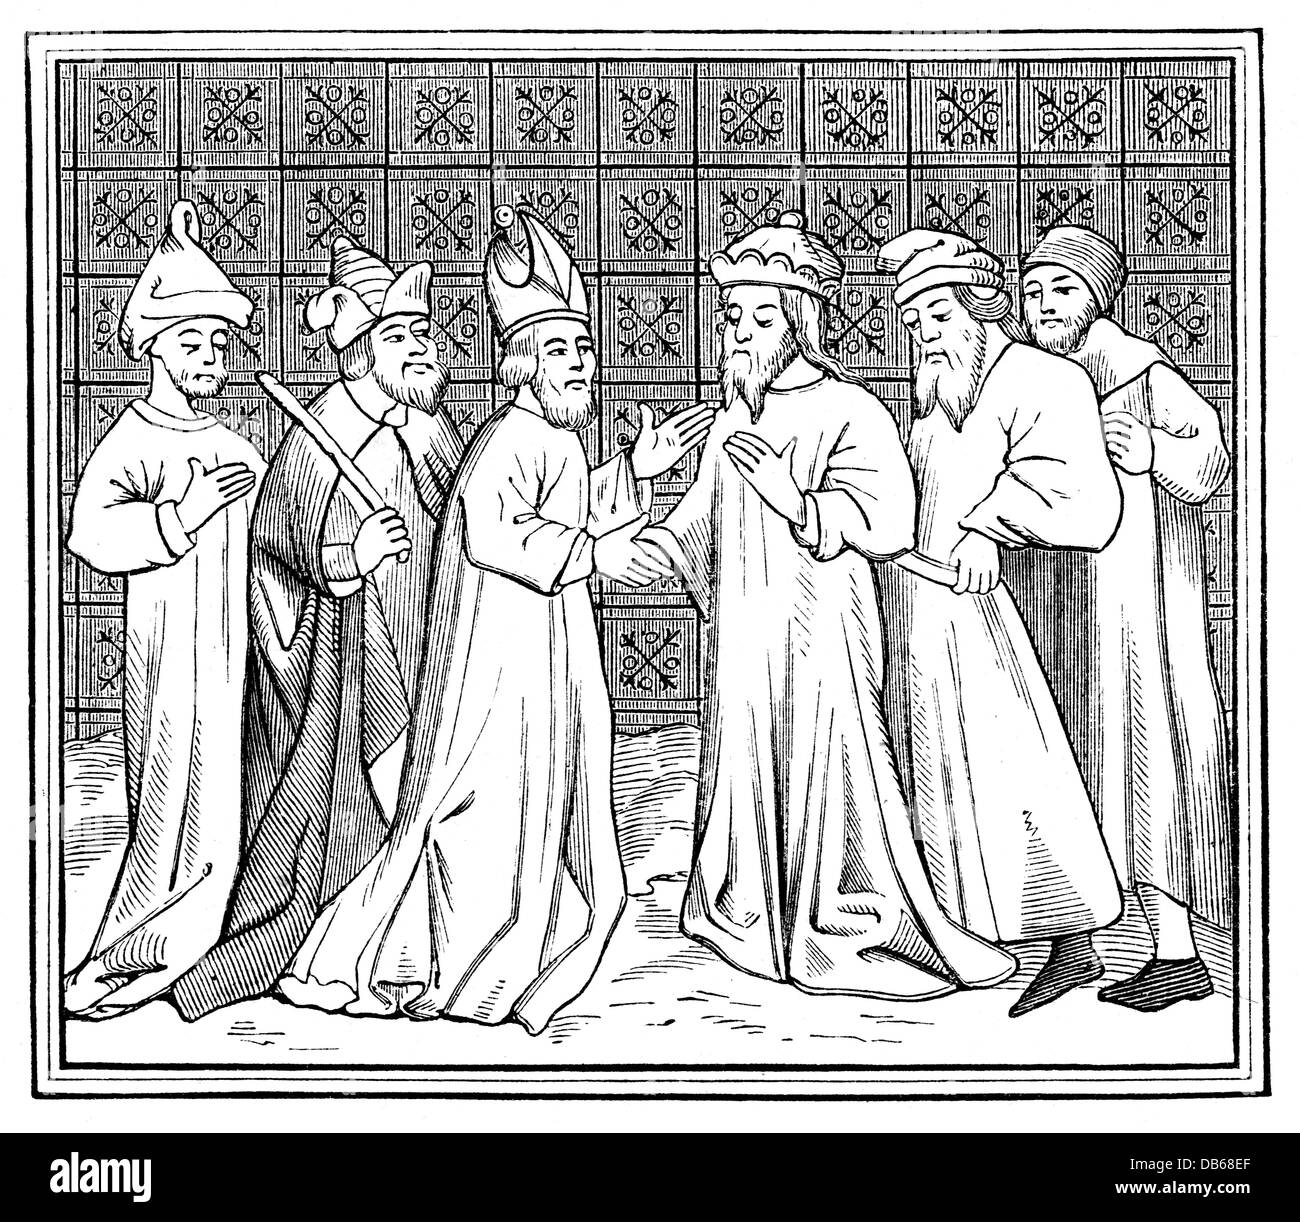 Judaism, anti-Semitism, propaganda, conspiracy of the Jews in France in the 13th century, after miniature from 'Le pelerinage de la vie humaine' by Guillaume de Digulleville, France, 1330/1331, wood engraving, 19th century, Additional-Rights-Clearences-Not Available Stock Photo